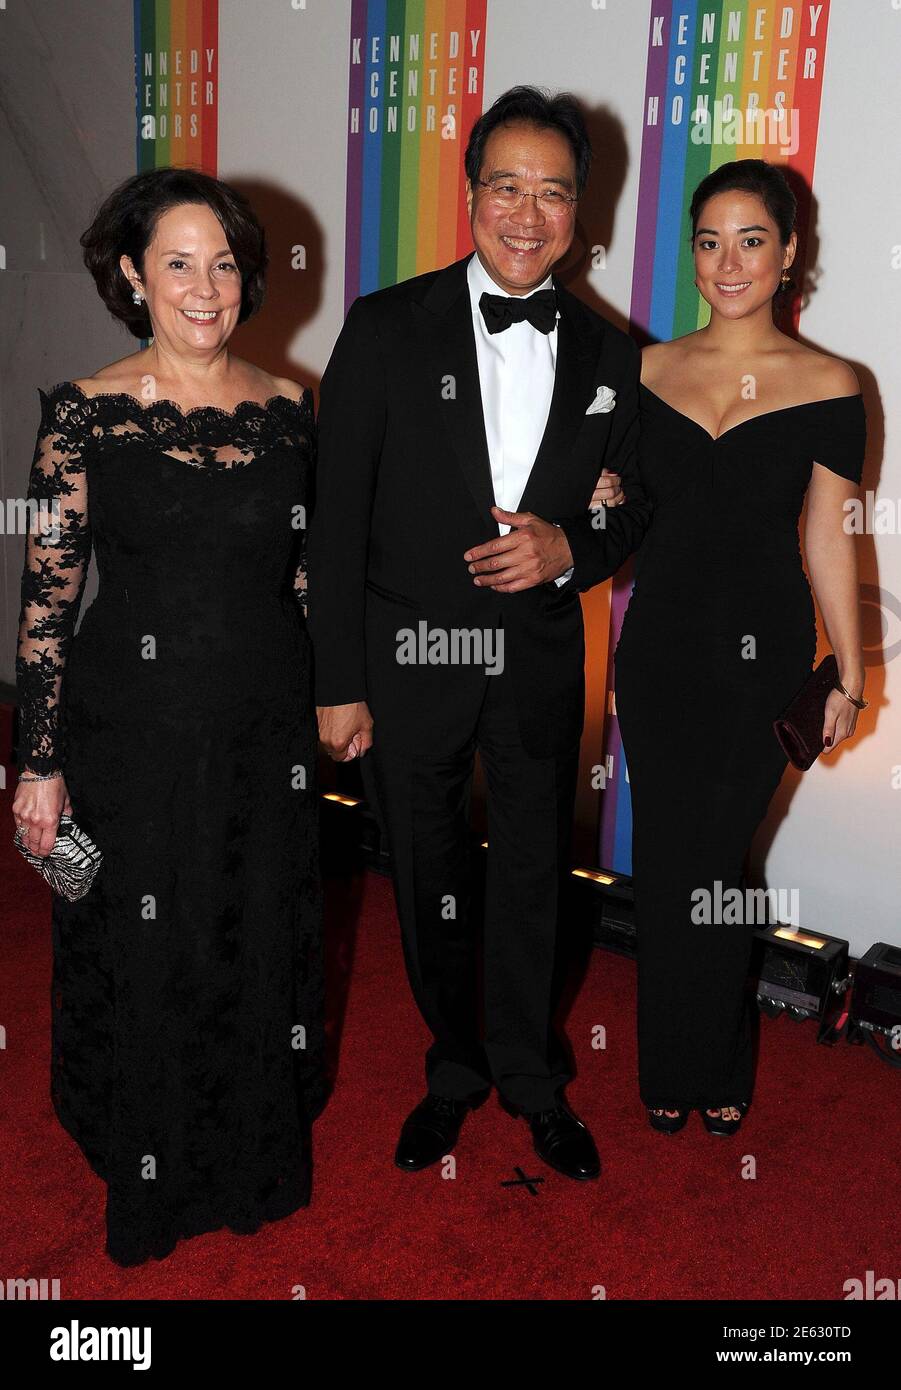 Former Kennedy Center honoree, cellist Yo-Yo Ma, his wife Jill Horner and  daughter Emily attend the 35th Annual Kennedy Center Honors performance and  gala at The John F. Kennedy Center for the